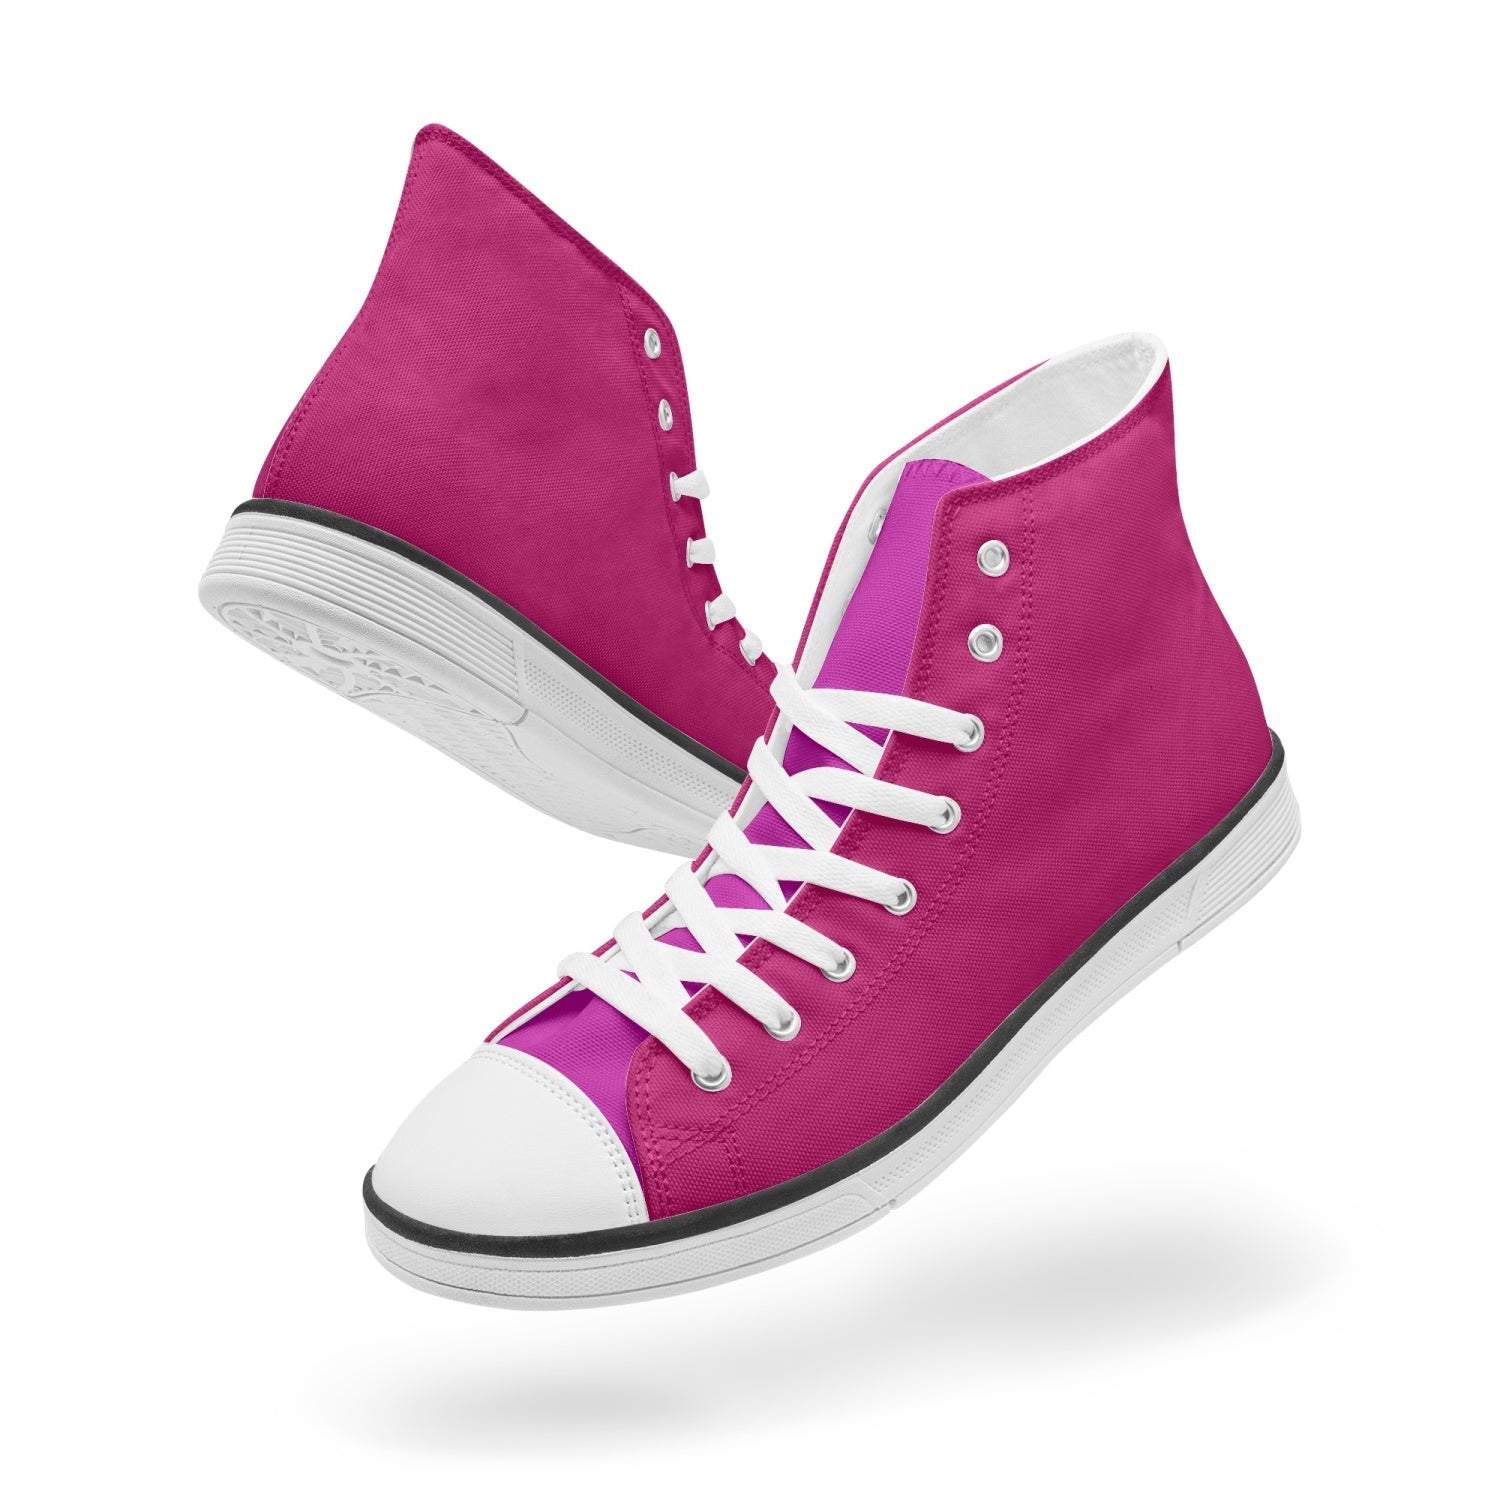 Shocking Mexican Pink Tone on Tone Light Adult High-Top Canvas Shoes